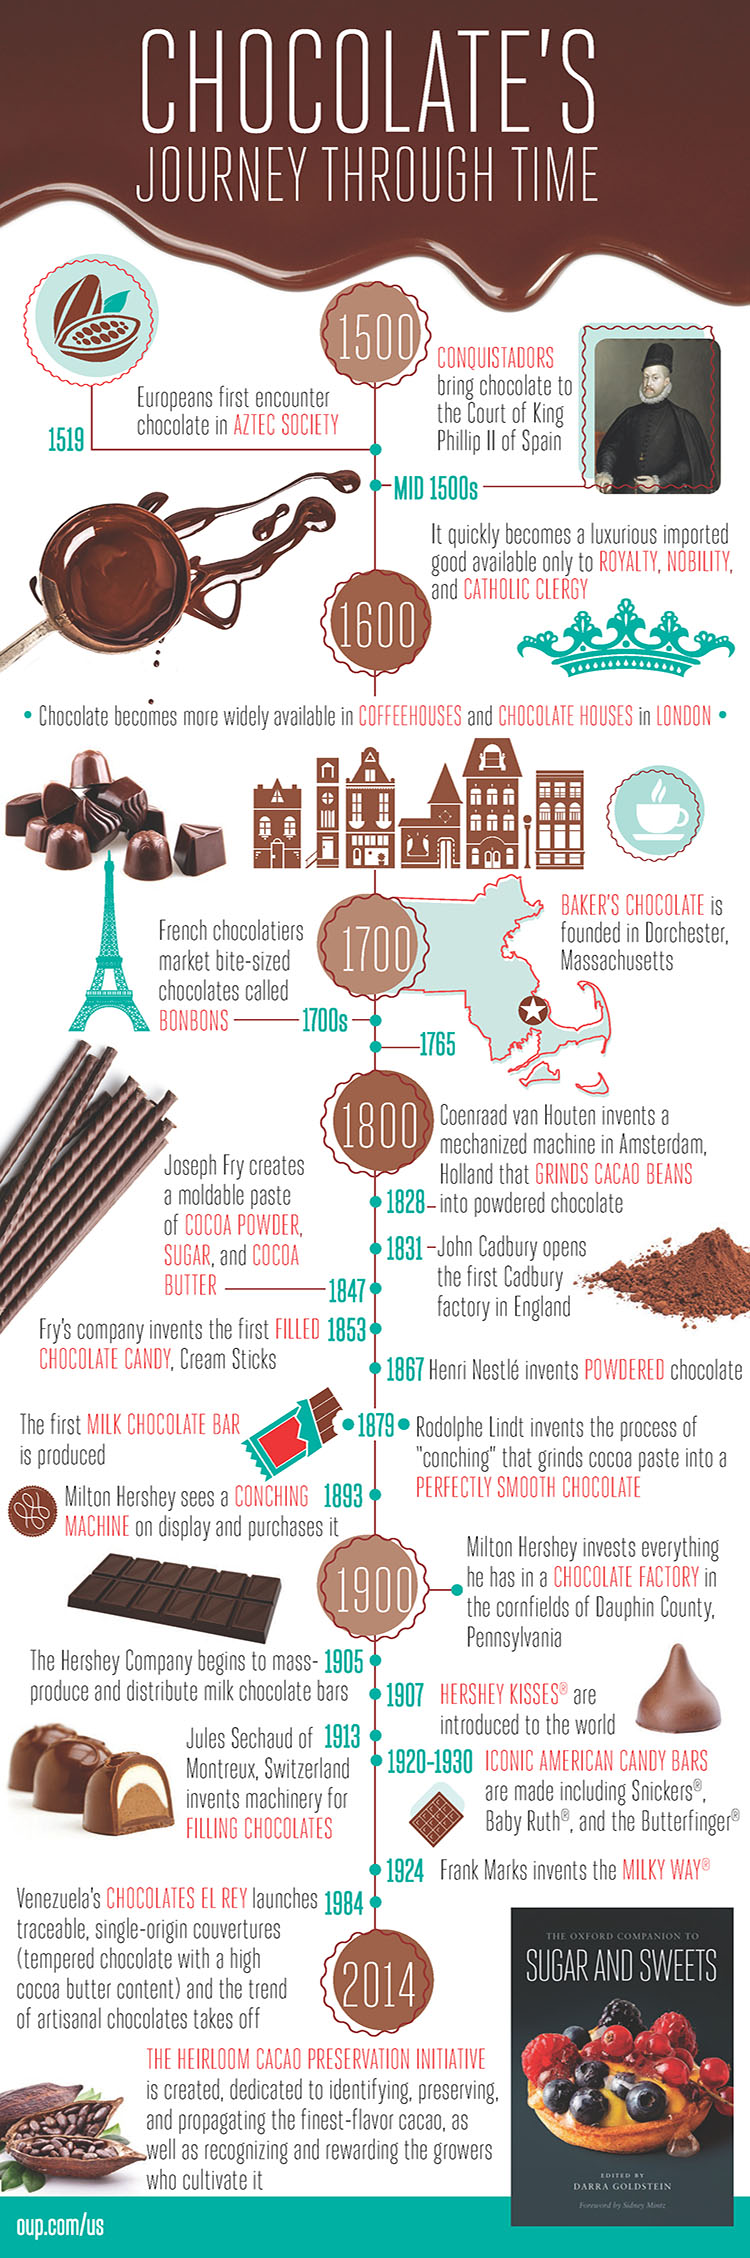 Chocolate's Journey Through Time